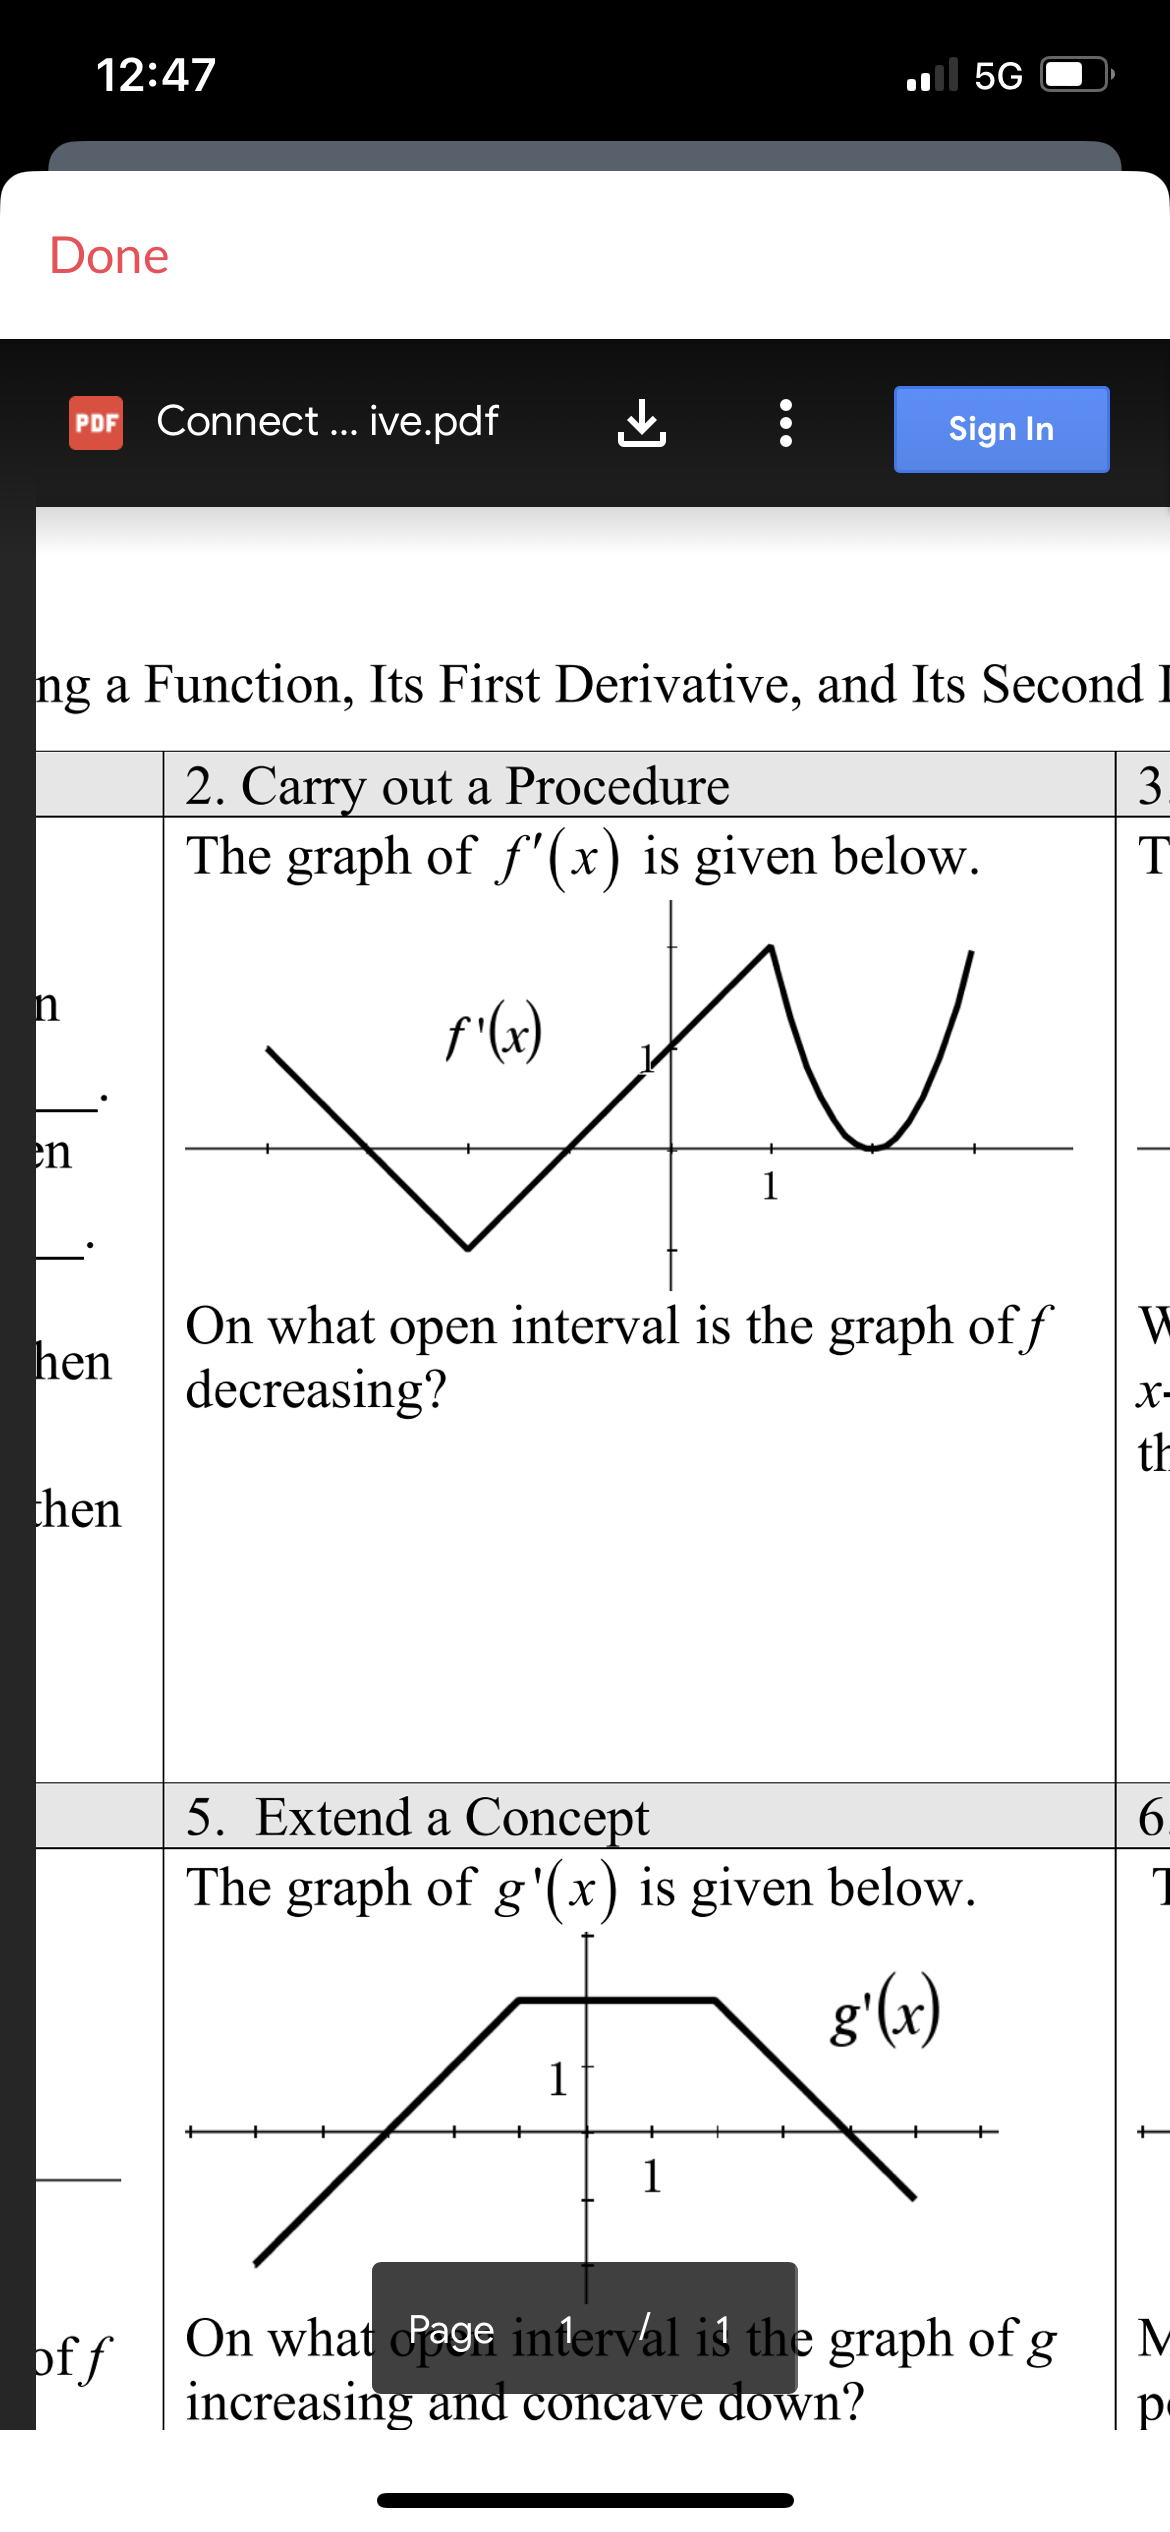 Done
12:47
n
en
PDF Connect... ive.pdf
hen
ng a Function, Its First Derivative, and Its Second
2. Carry out a Procedure
The graph of f'(x) is given below.
v
then
off
f'(x)
→]
●●●
1
... 56
1
1
Sign In
On what open interval is the graph off
decreasing?
5. Extend a Concept
The graph of g'(x) is given below.
g'(x)
On what Page interval is the graph of g
increasing and concave down?
3.
T
W
X-
th
6
ΣΩ